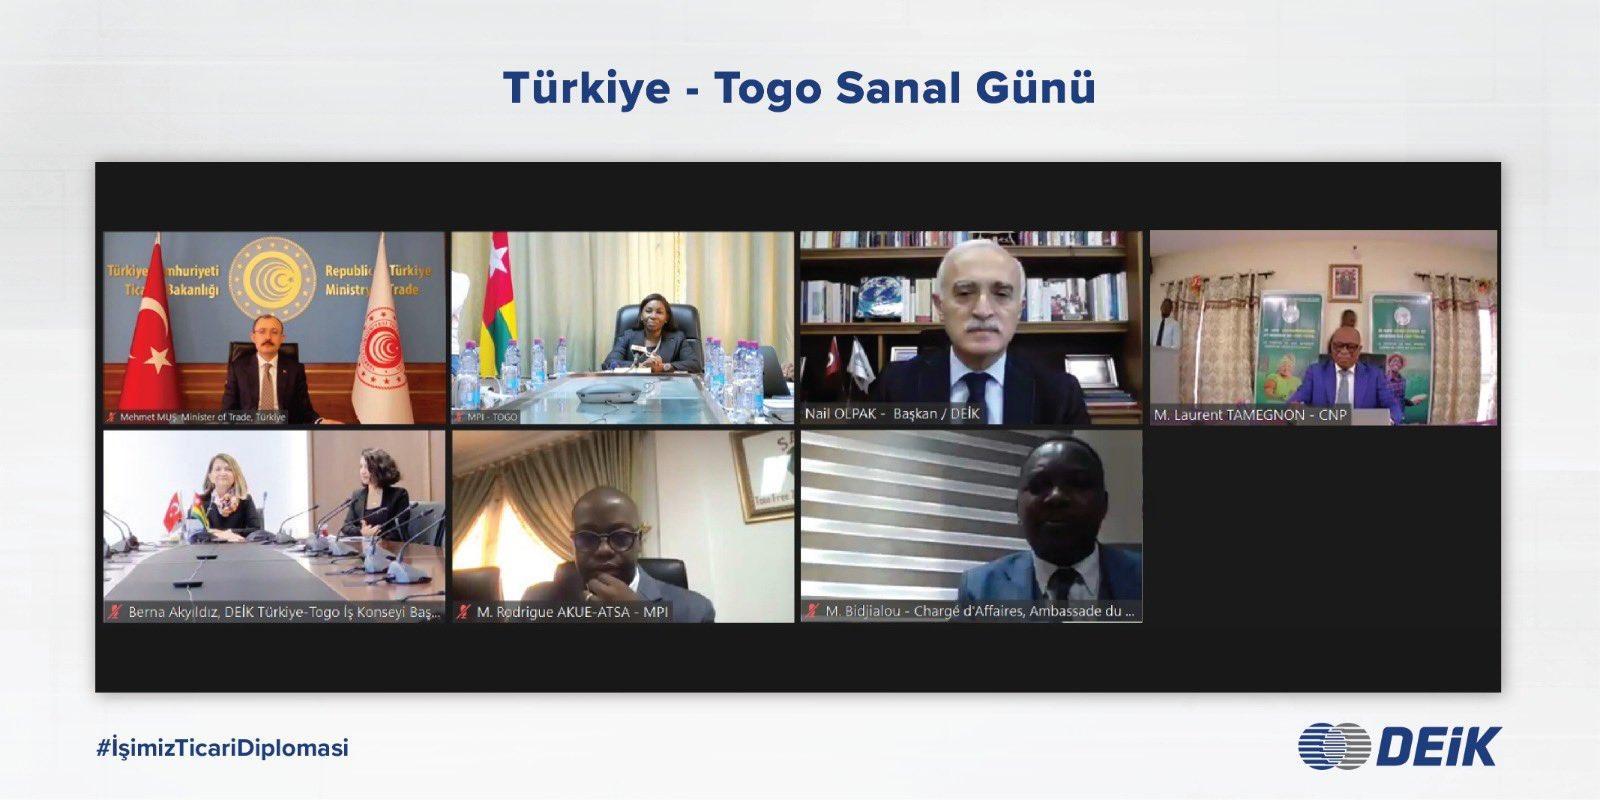 Business Diplomacy-Togo and Türkiye sign a protocol agreement